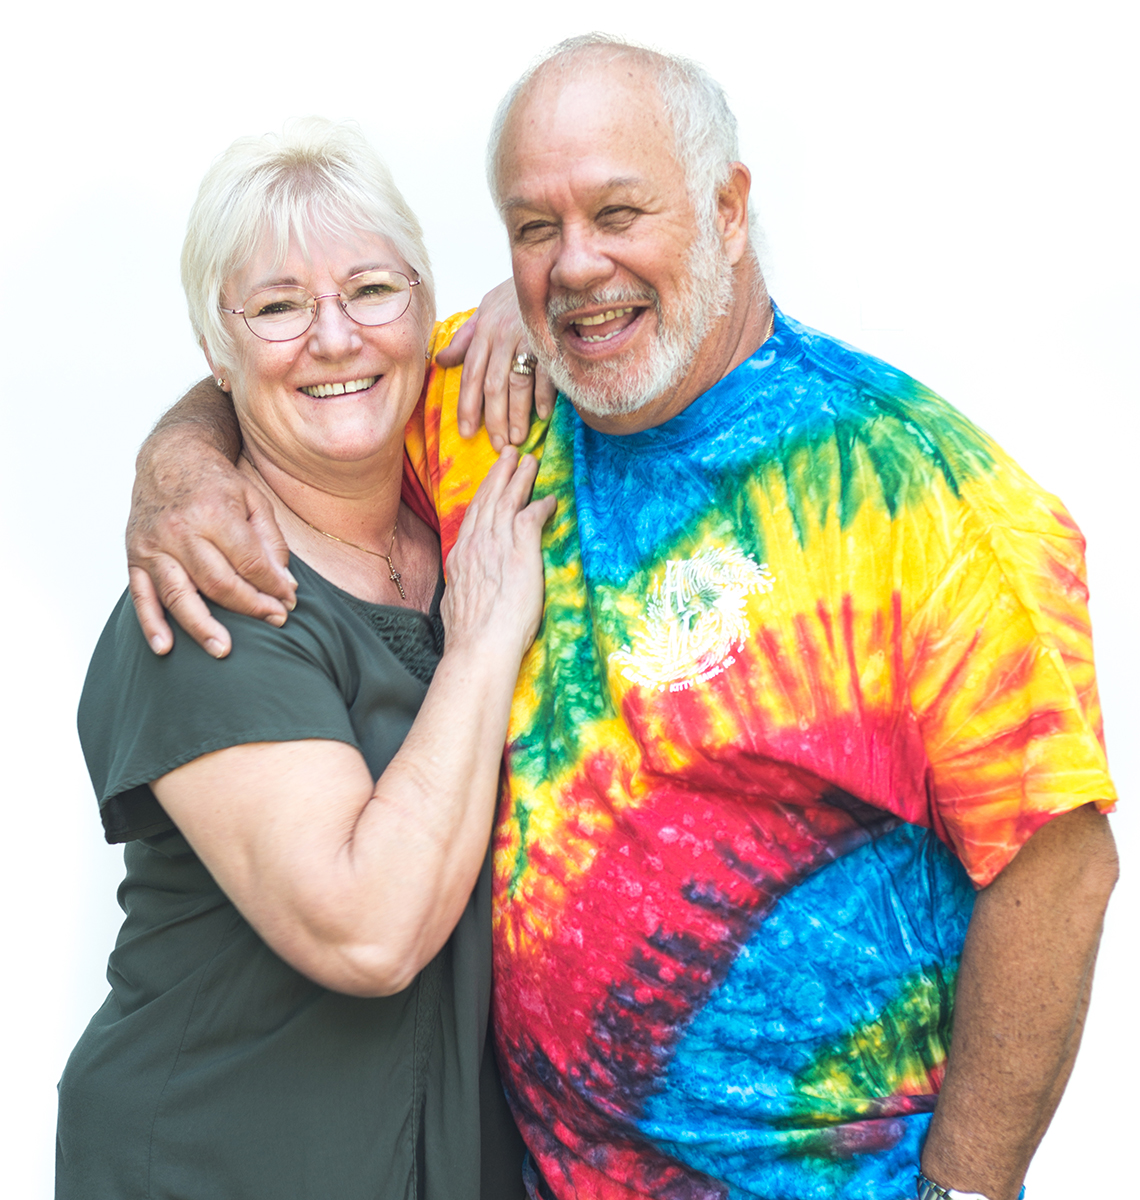 Woodstock Album Cover Couple Discuss Festival and Family